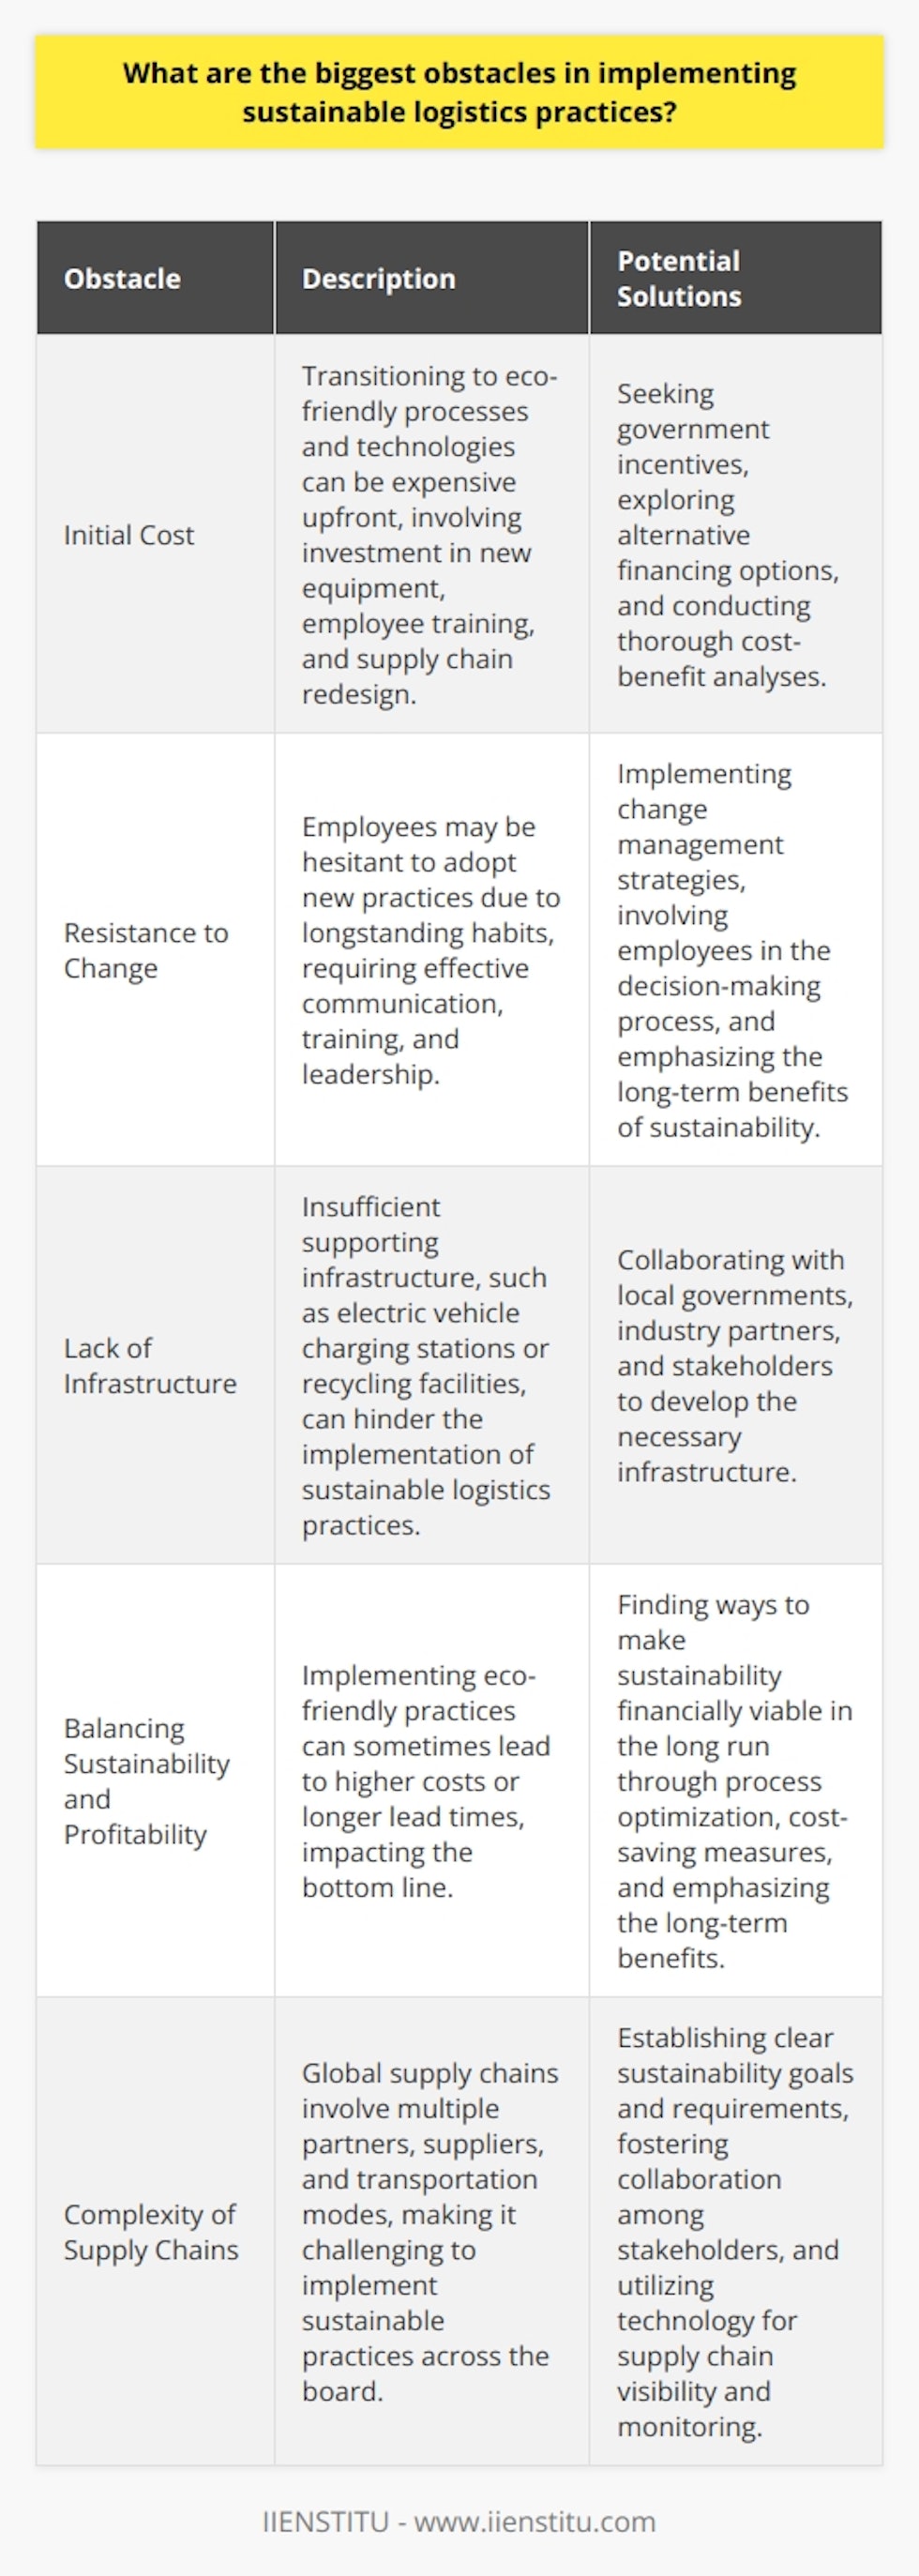 When it comes to implementing sustainable logistics practices, there are several significant obstacles that companies may face. One of the biggest challenges is the initial cost of transitioning to more eco-friendly processes and technologies. Investing in new equipment, training employees, and redesigning supply chain networks can be expensive upfront. Resistance to Change Another obstacle is resistance to change within organizations. Employees may be hesitant to adopt new practices, especially if theyve been doing things a certain way for a long time. It takes effective communication, training, and leadership to get everyone on board with sustainability initiatives. Lack of Infrastructure The lack of infrastructure for sustainable logistics can also be a hindrance. For example, there may not be enough charging stations for electric vehicles or recycling facilities for packaging materials. This requires collaboration with local governments and other stakeholders to develop the necessary infrastructure. Balancing Sustainability and Profitability Companies also struggle with balancing sustainability and profitability. Implementing eco-friendly practices can sometimes lead to higher costs or longer lead times, which can impact the bottom line. Its important to find ways to make sustainability financially viable in the long run. Complexity of Supply Chains Finally, the complexity of global supply chains can make it challenging to implement sustainable practices across the board. With multiple partners, suppliers, and transportation modes involved, it requires a coordinated effort to ensure sustainability at every stage of the logistics process. Despite these obstacles, I believe that with creativity, collaboration, and commitment, companies can overcome them and make meaningful progress towards sustainable logistics. It may not be easy, but its essential for the health of our planet and future generations.